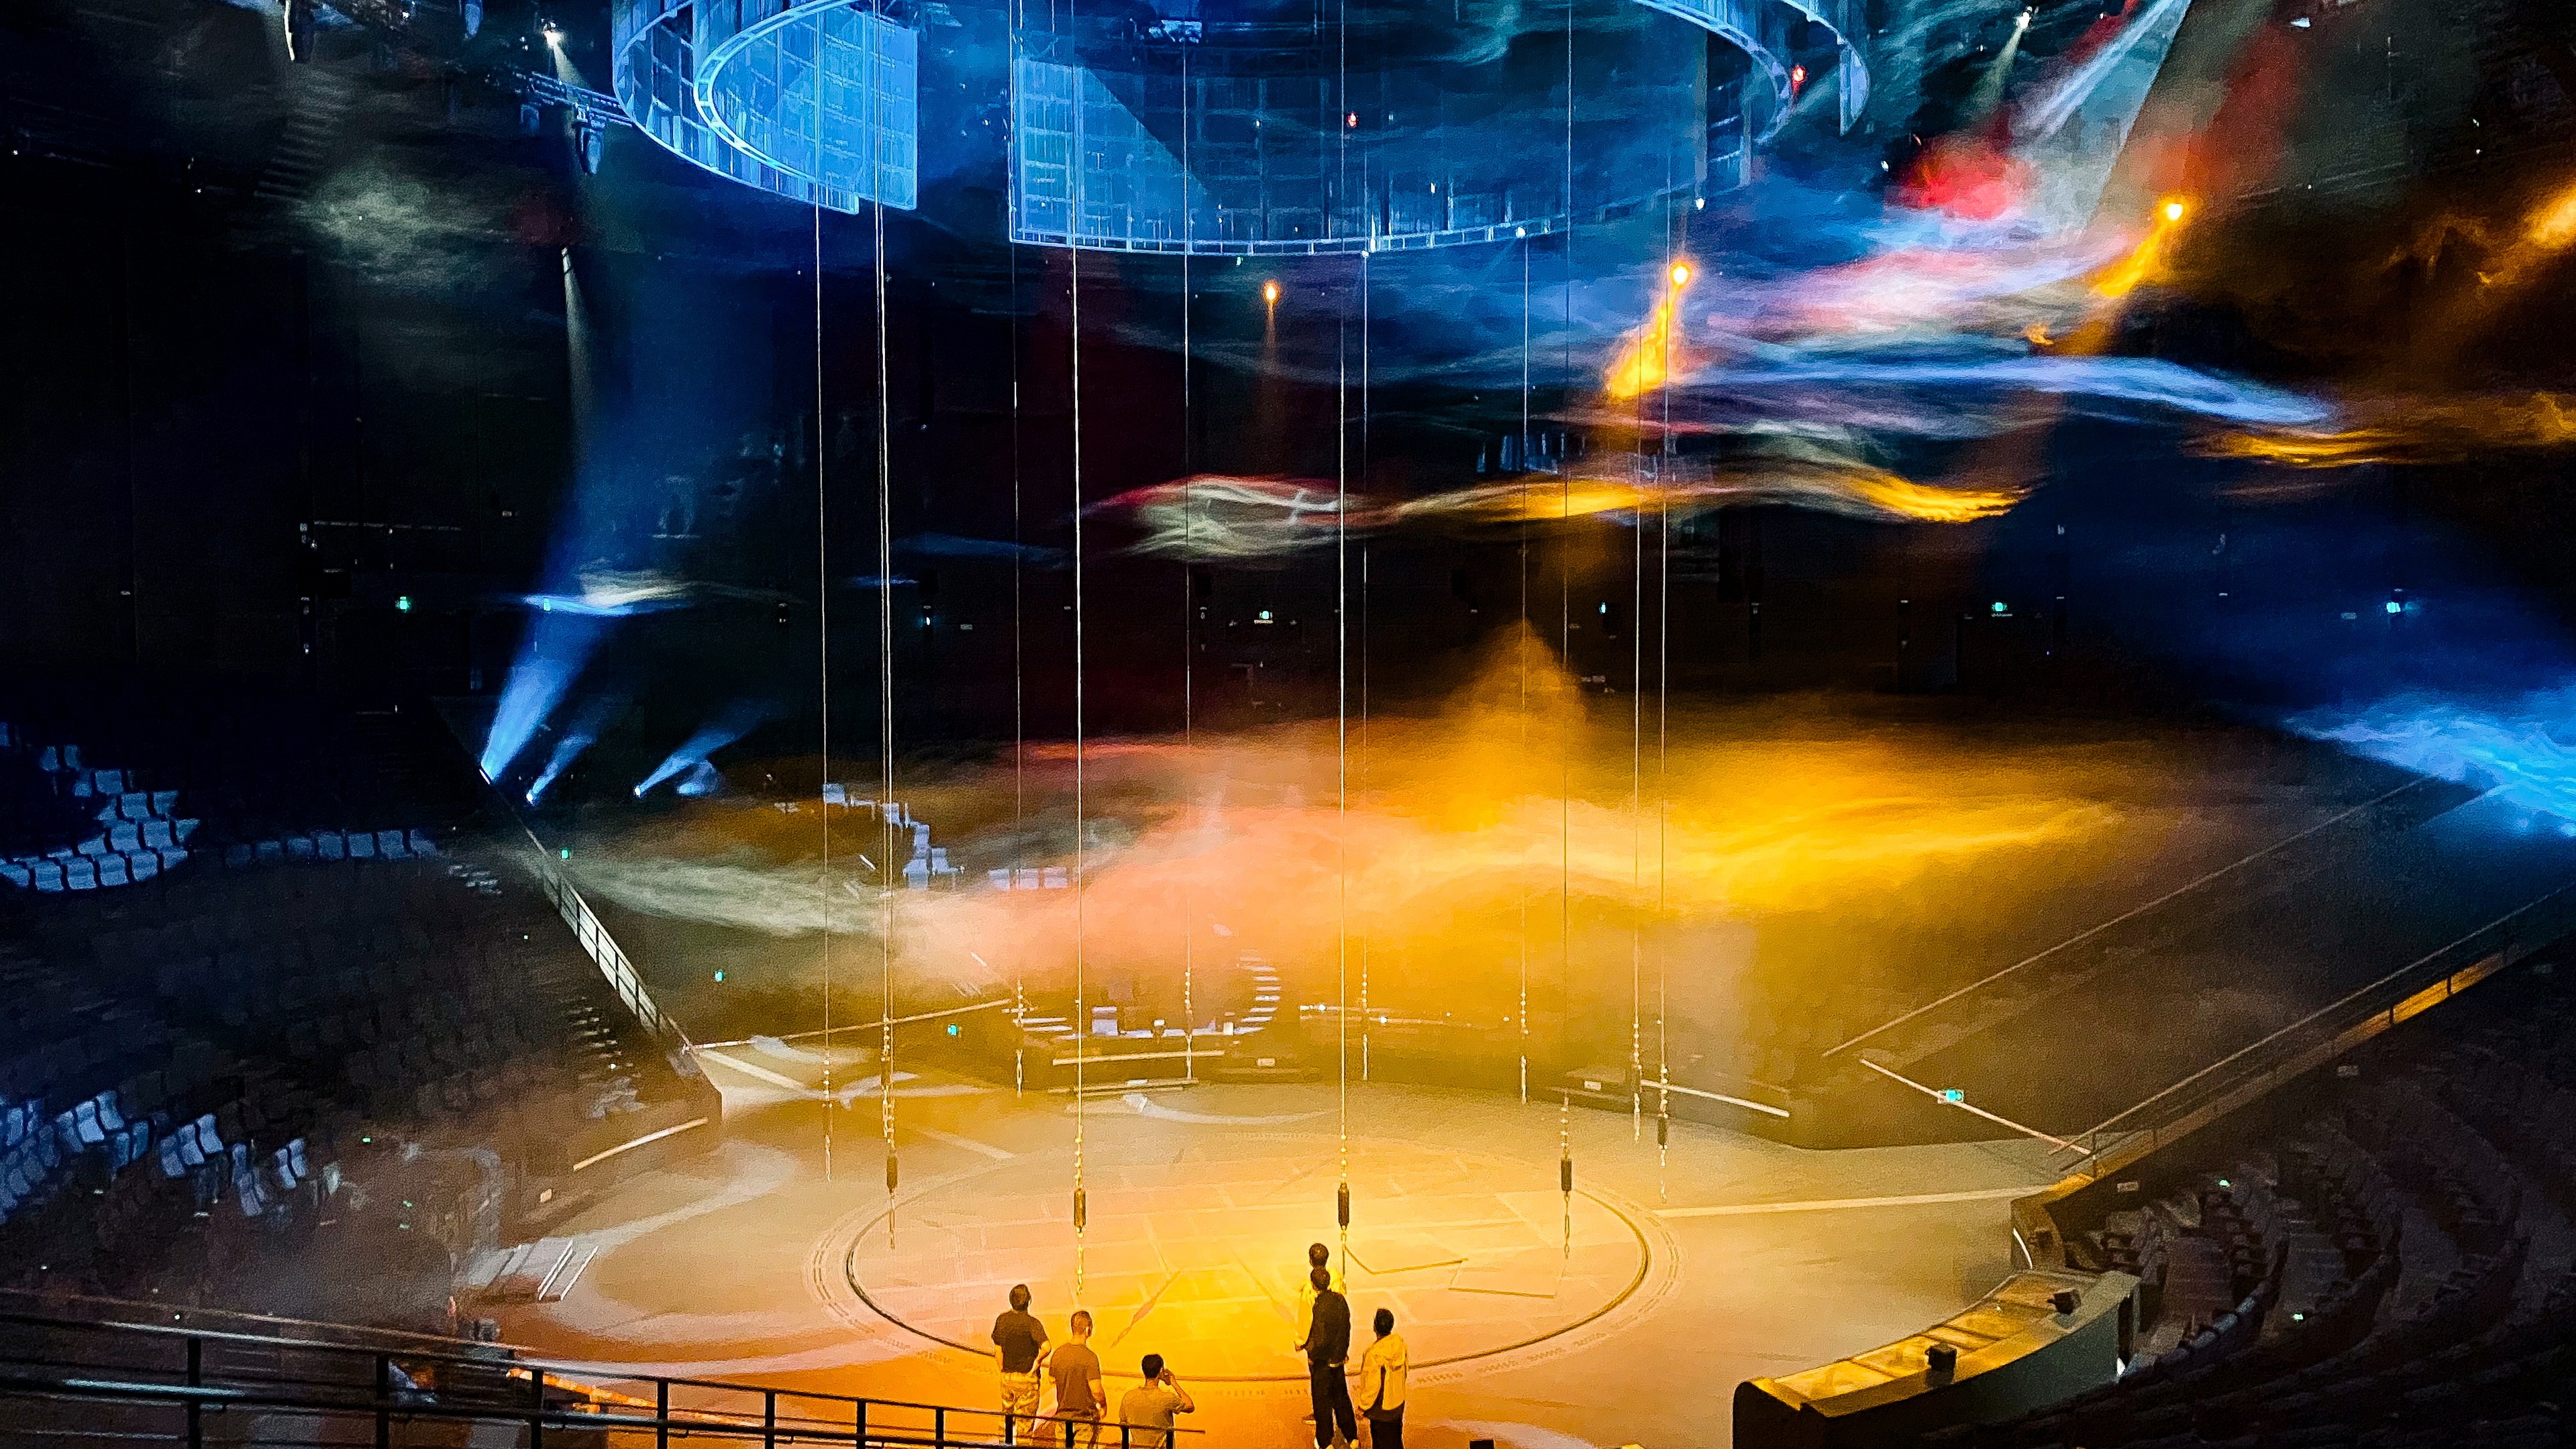 Multiple performer flying hoists hung down into the centre of a round theatre with lighting effects